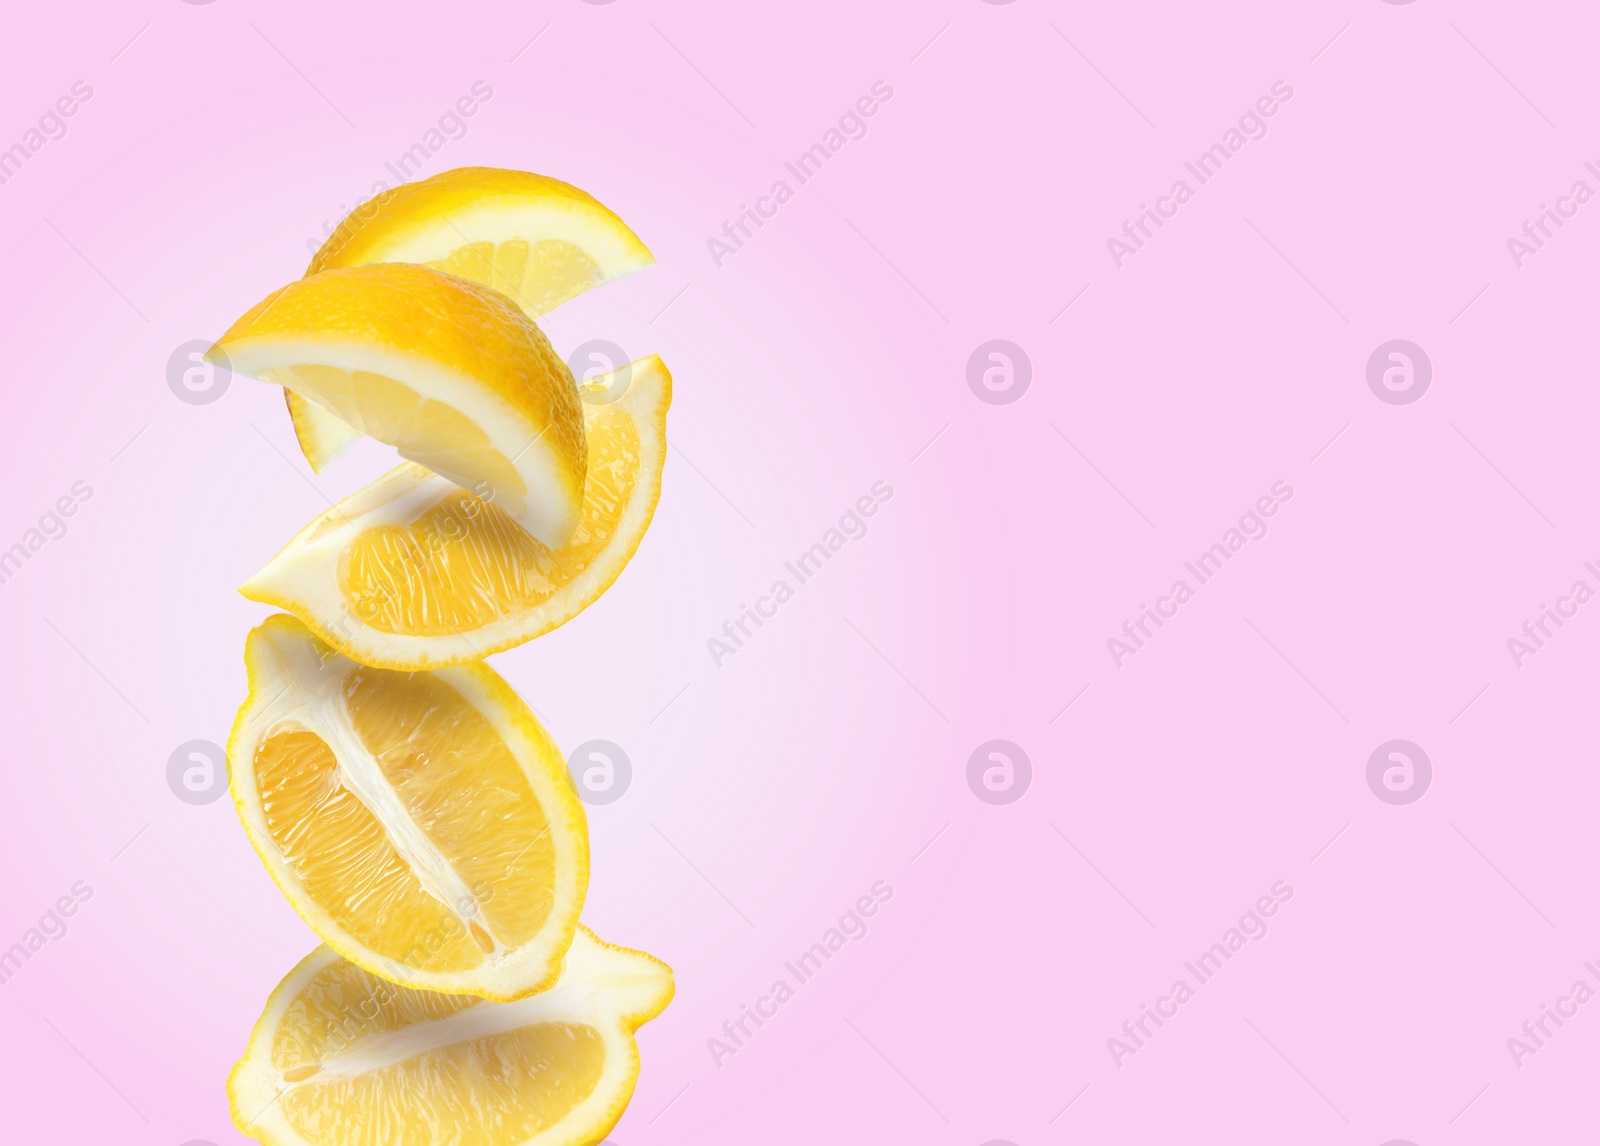 Image of Cut fresh ripe lemons falling on pink background, space for text